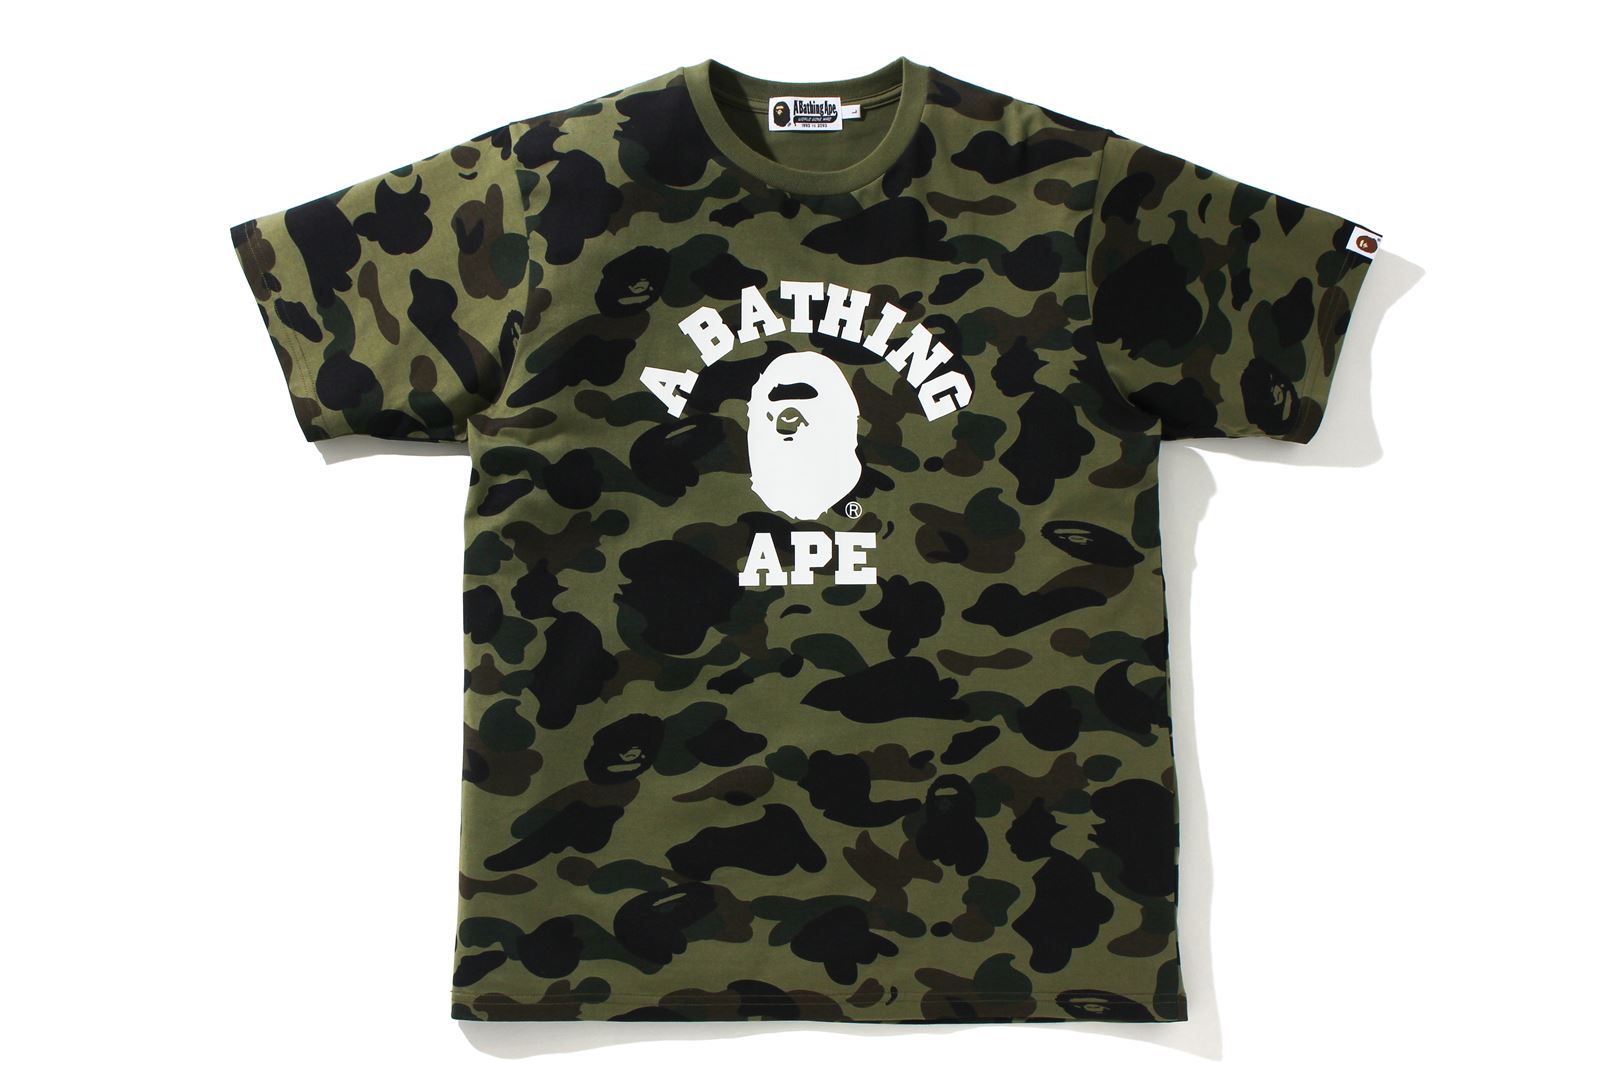 Best Selling Shopify Products on bape.com-4